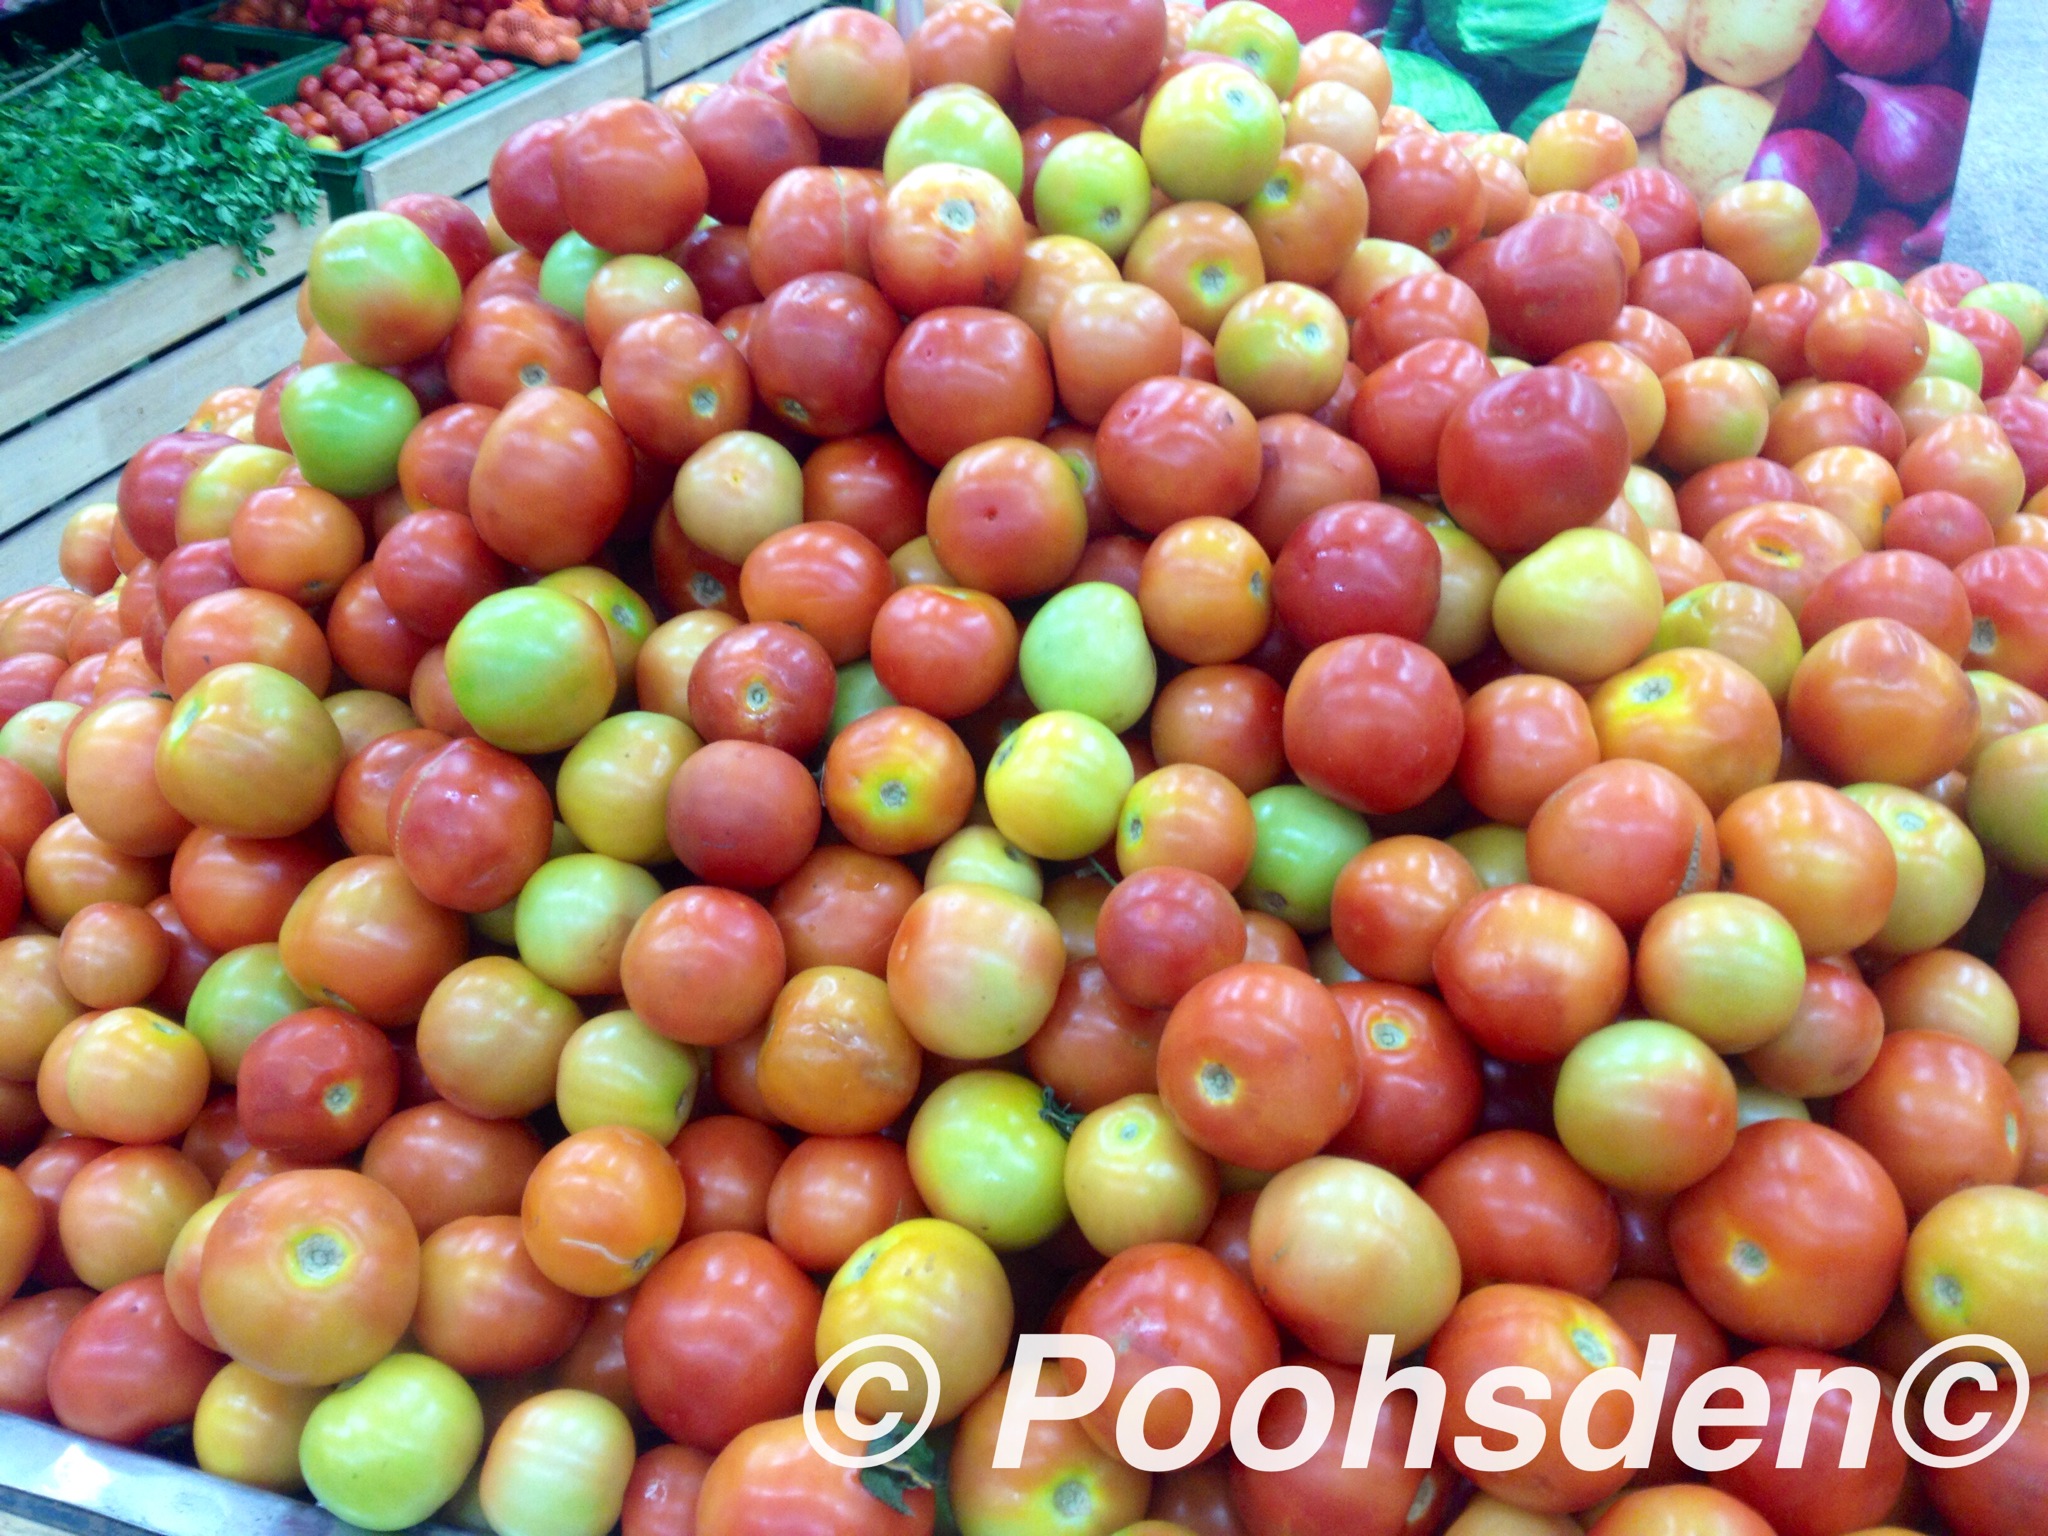 Tomatoes for sale in a market in Chennai, India